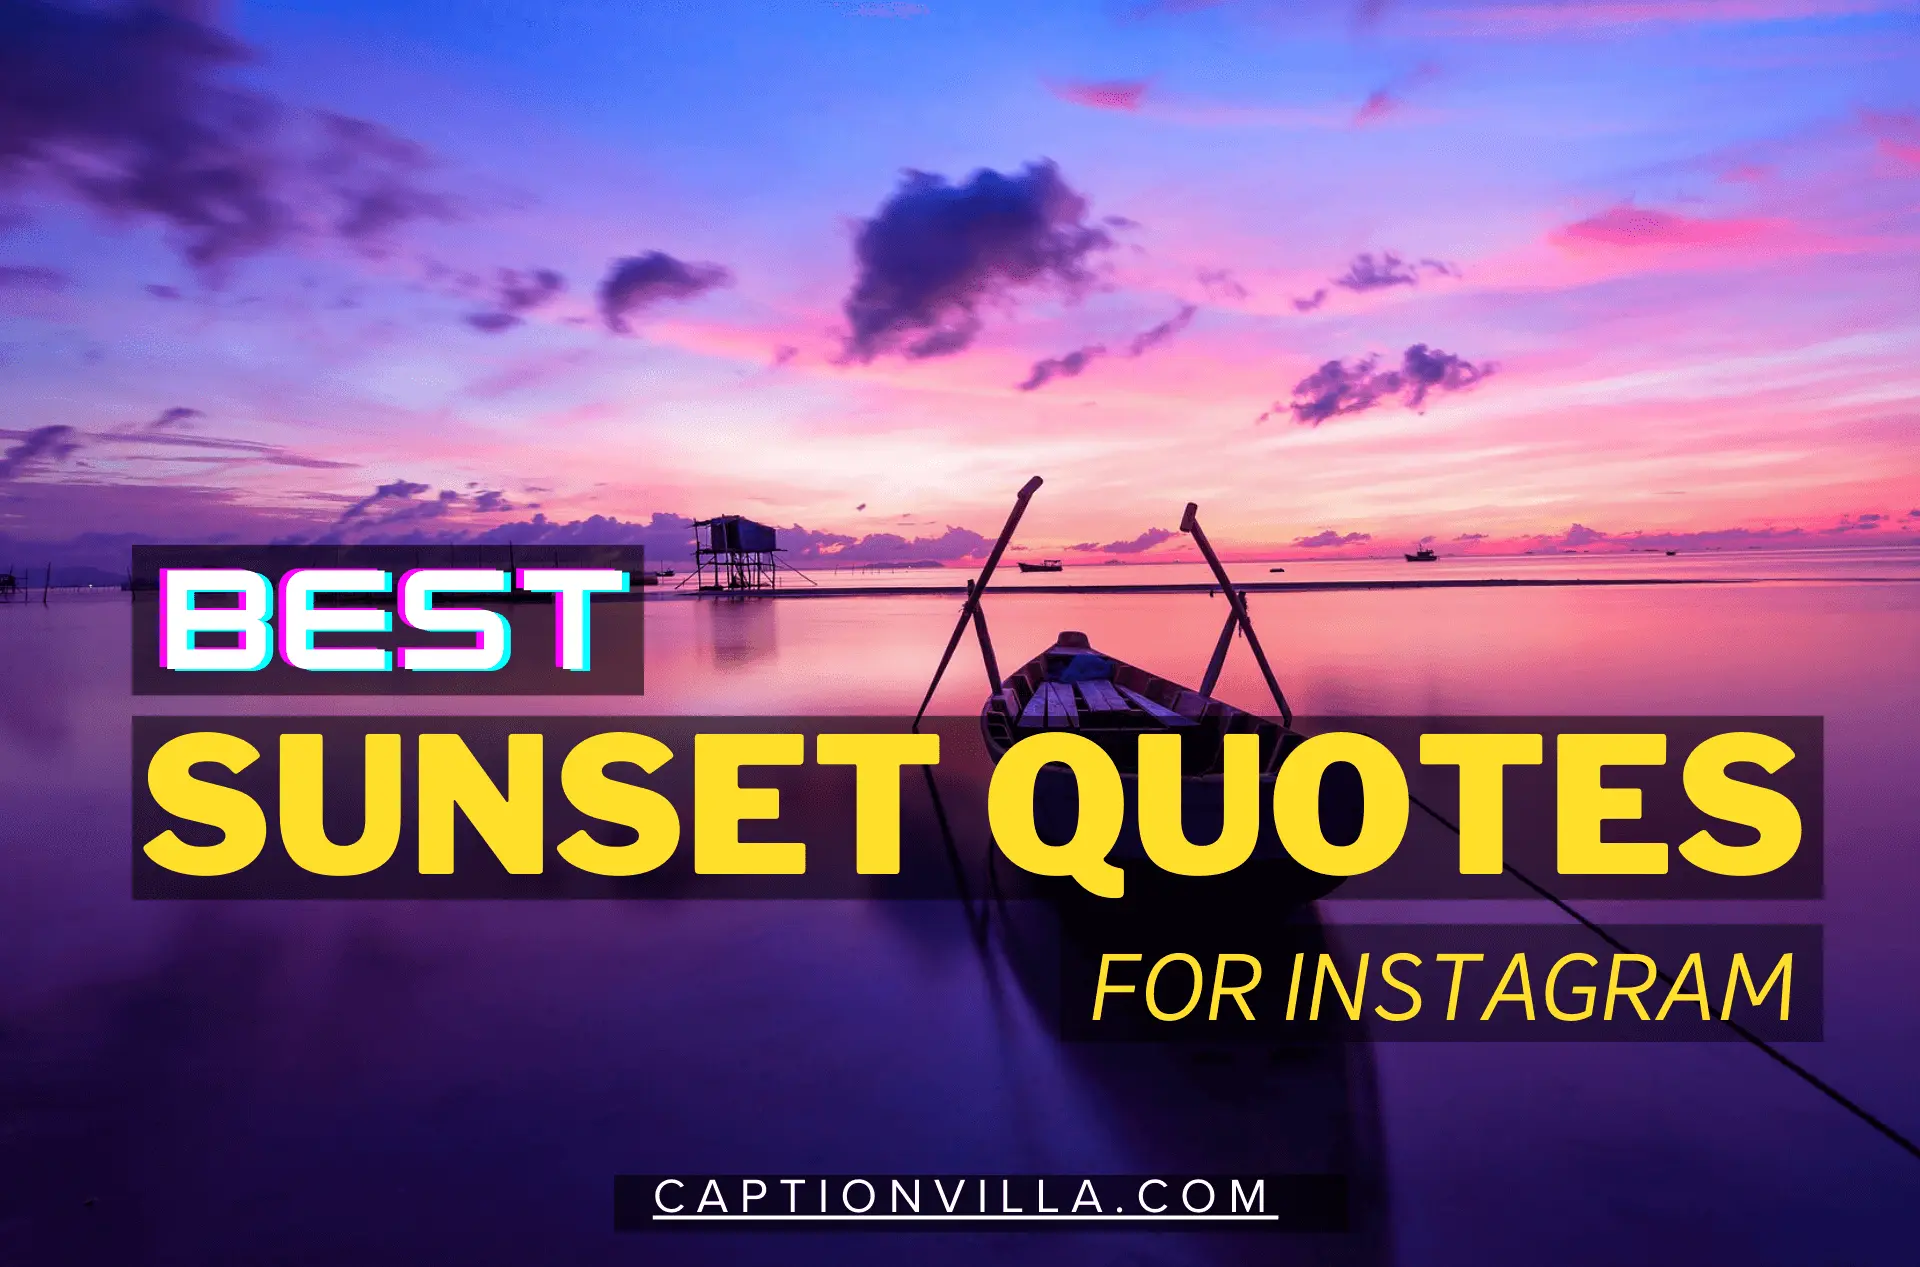 Best, catchy, cool,beautiful and beach sunset quotes for instagram, captionvilla.com